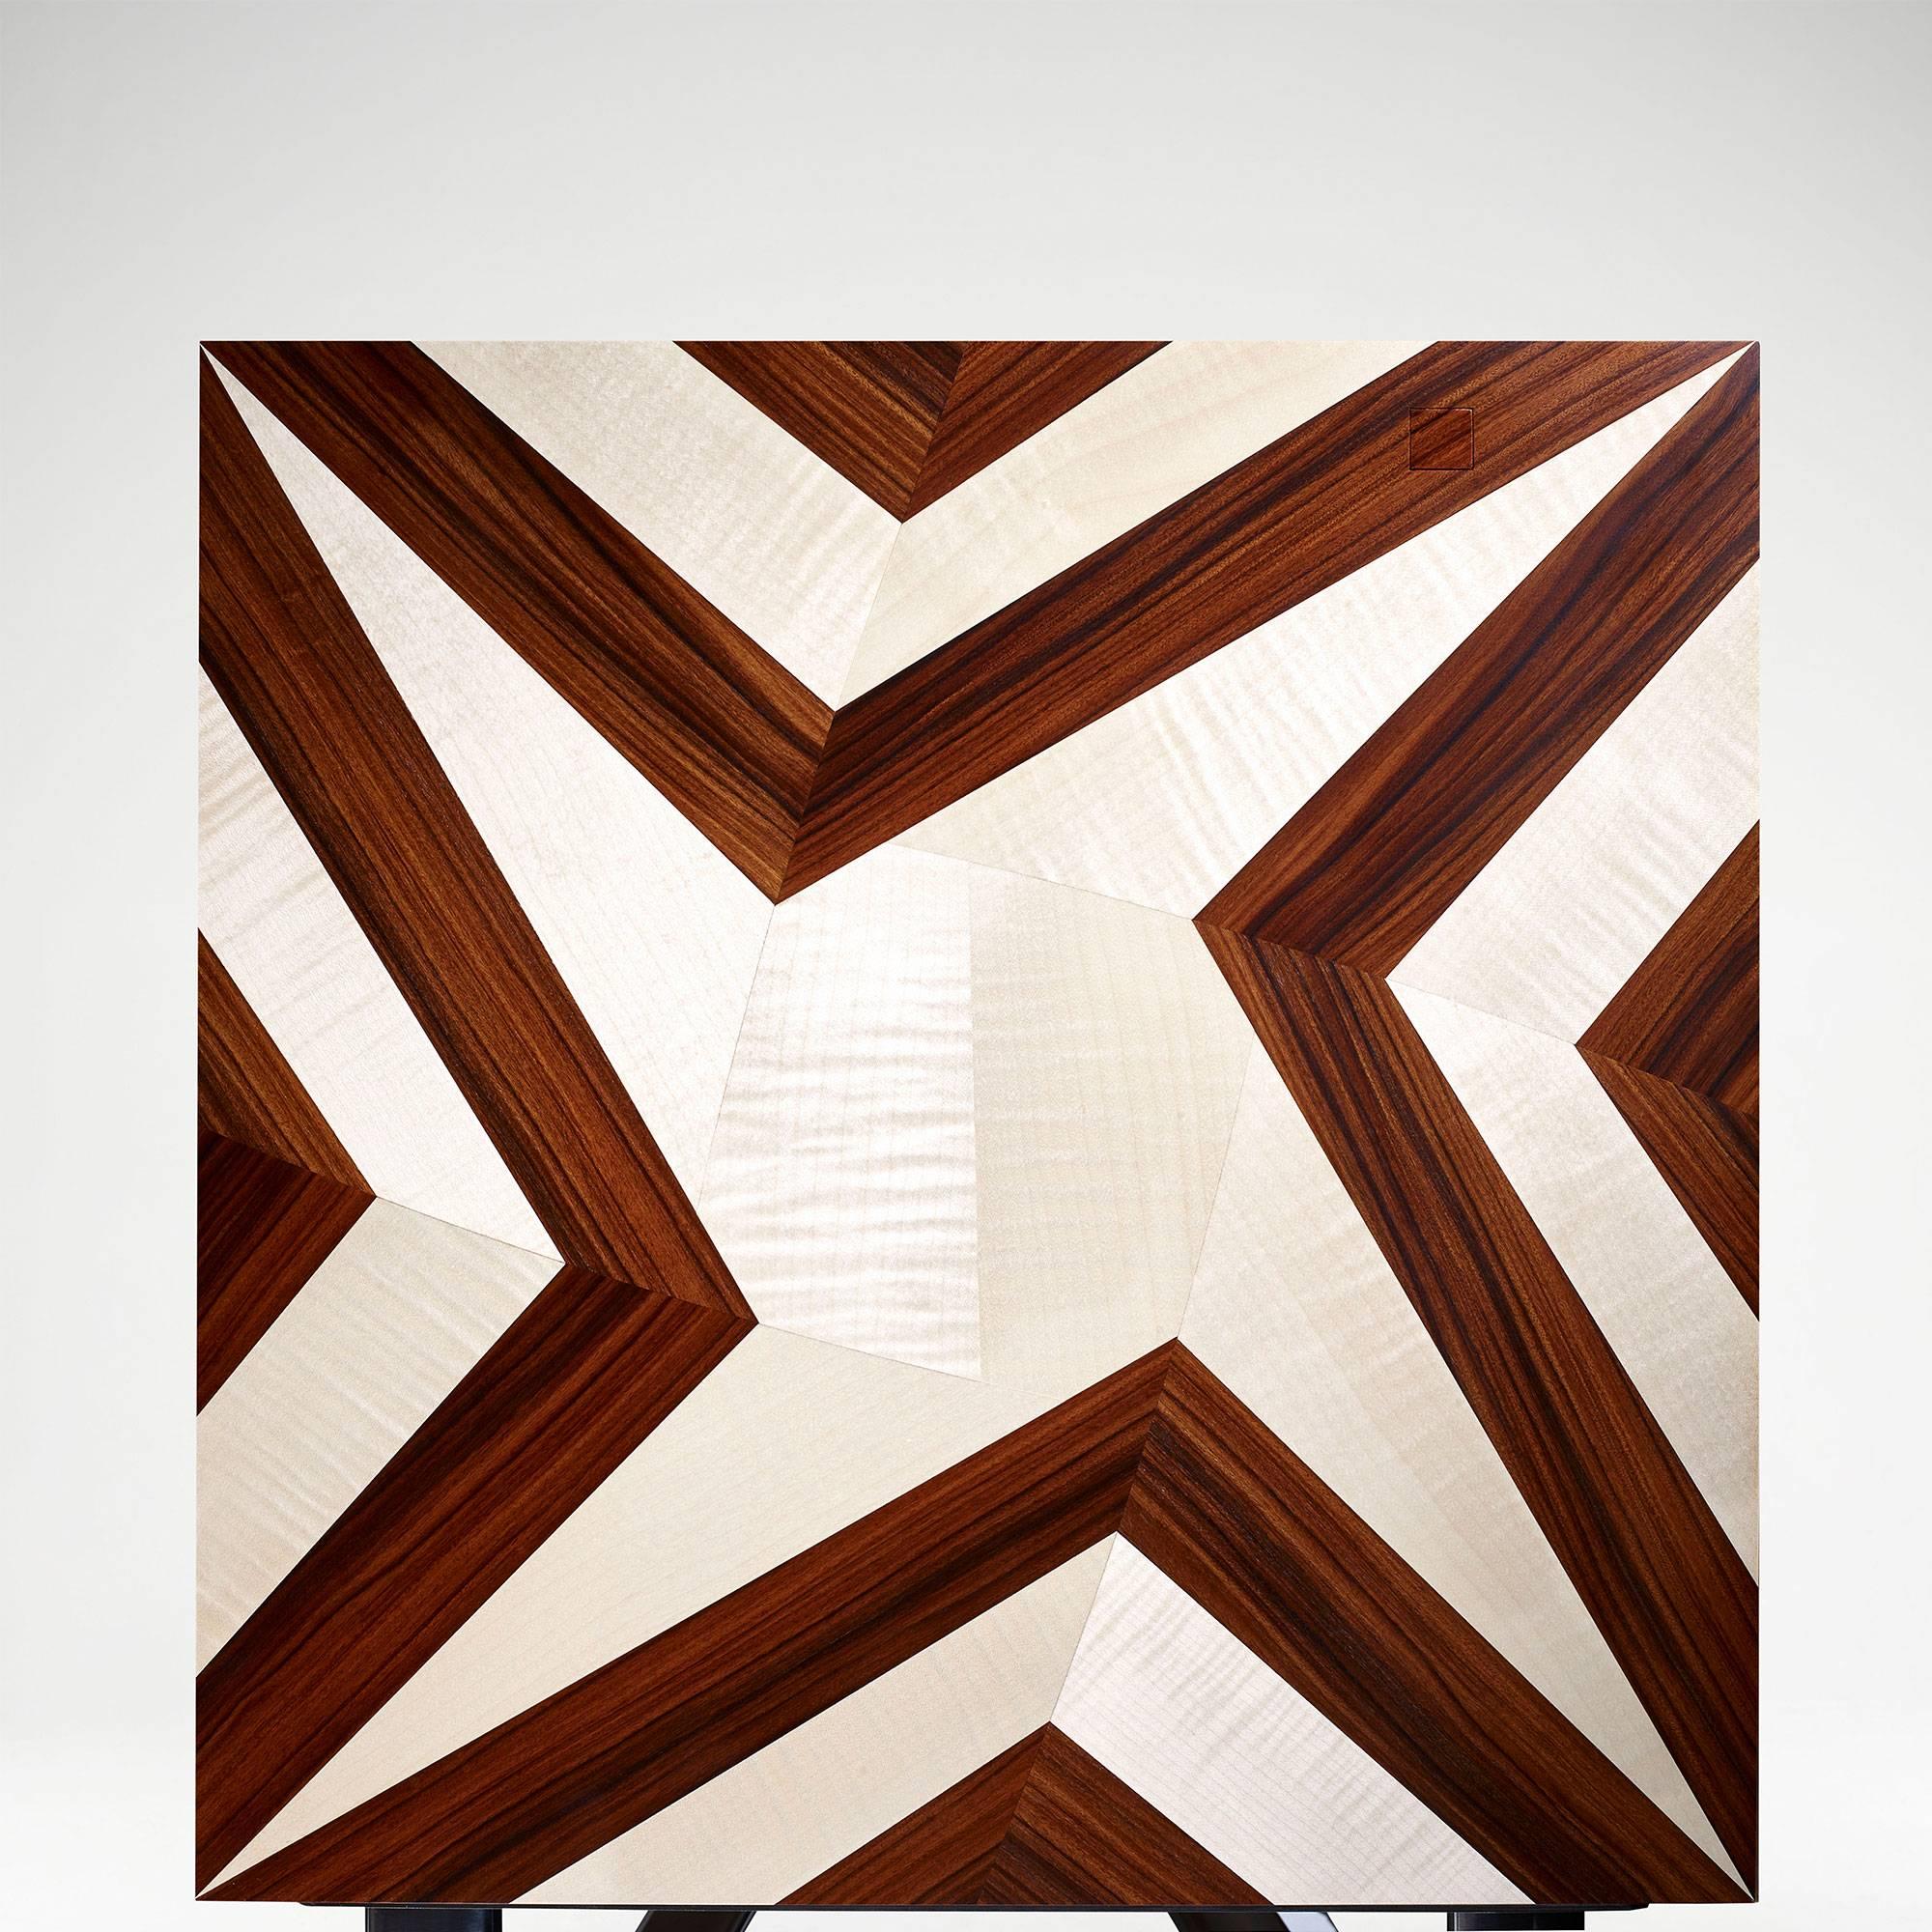 The Vortex cabinet is as much a work of art and a puzzle as it is an item of furniture. Covered in a veneer of Sycamore and Santos rosewood, the marquetry design challenges the perceptions of a usual cabinet. An optical illusion with seemingly no